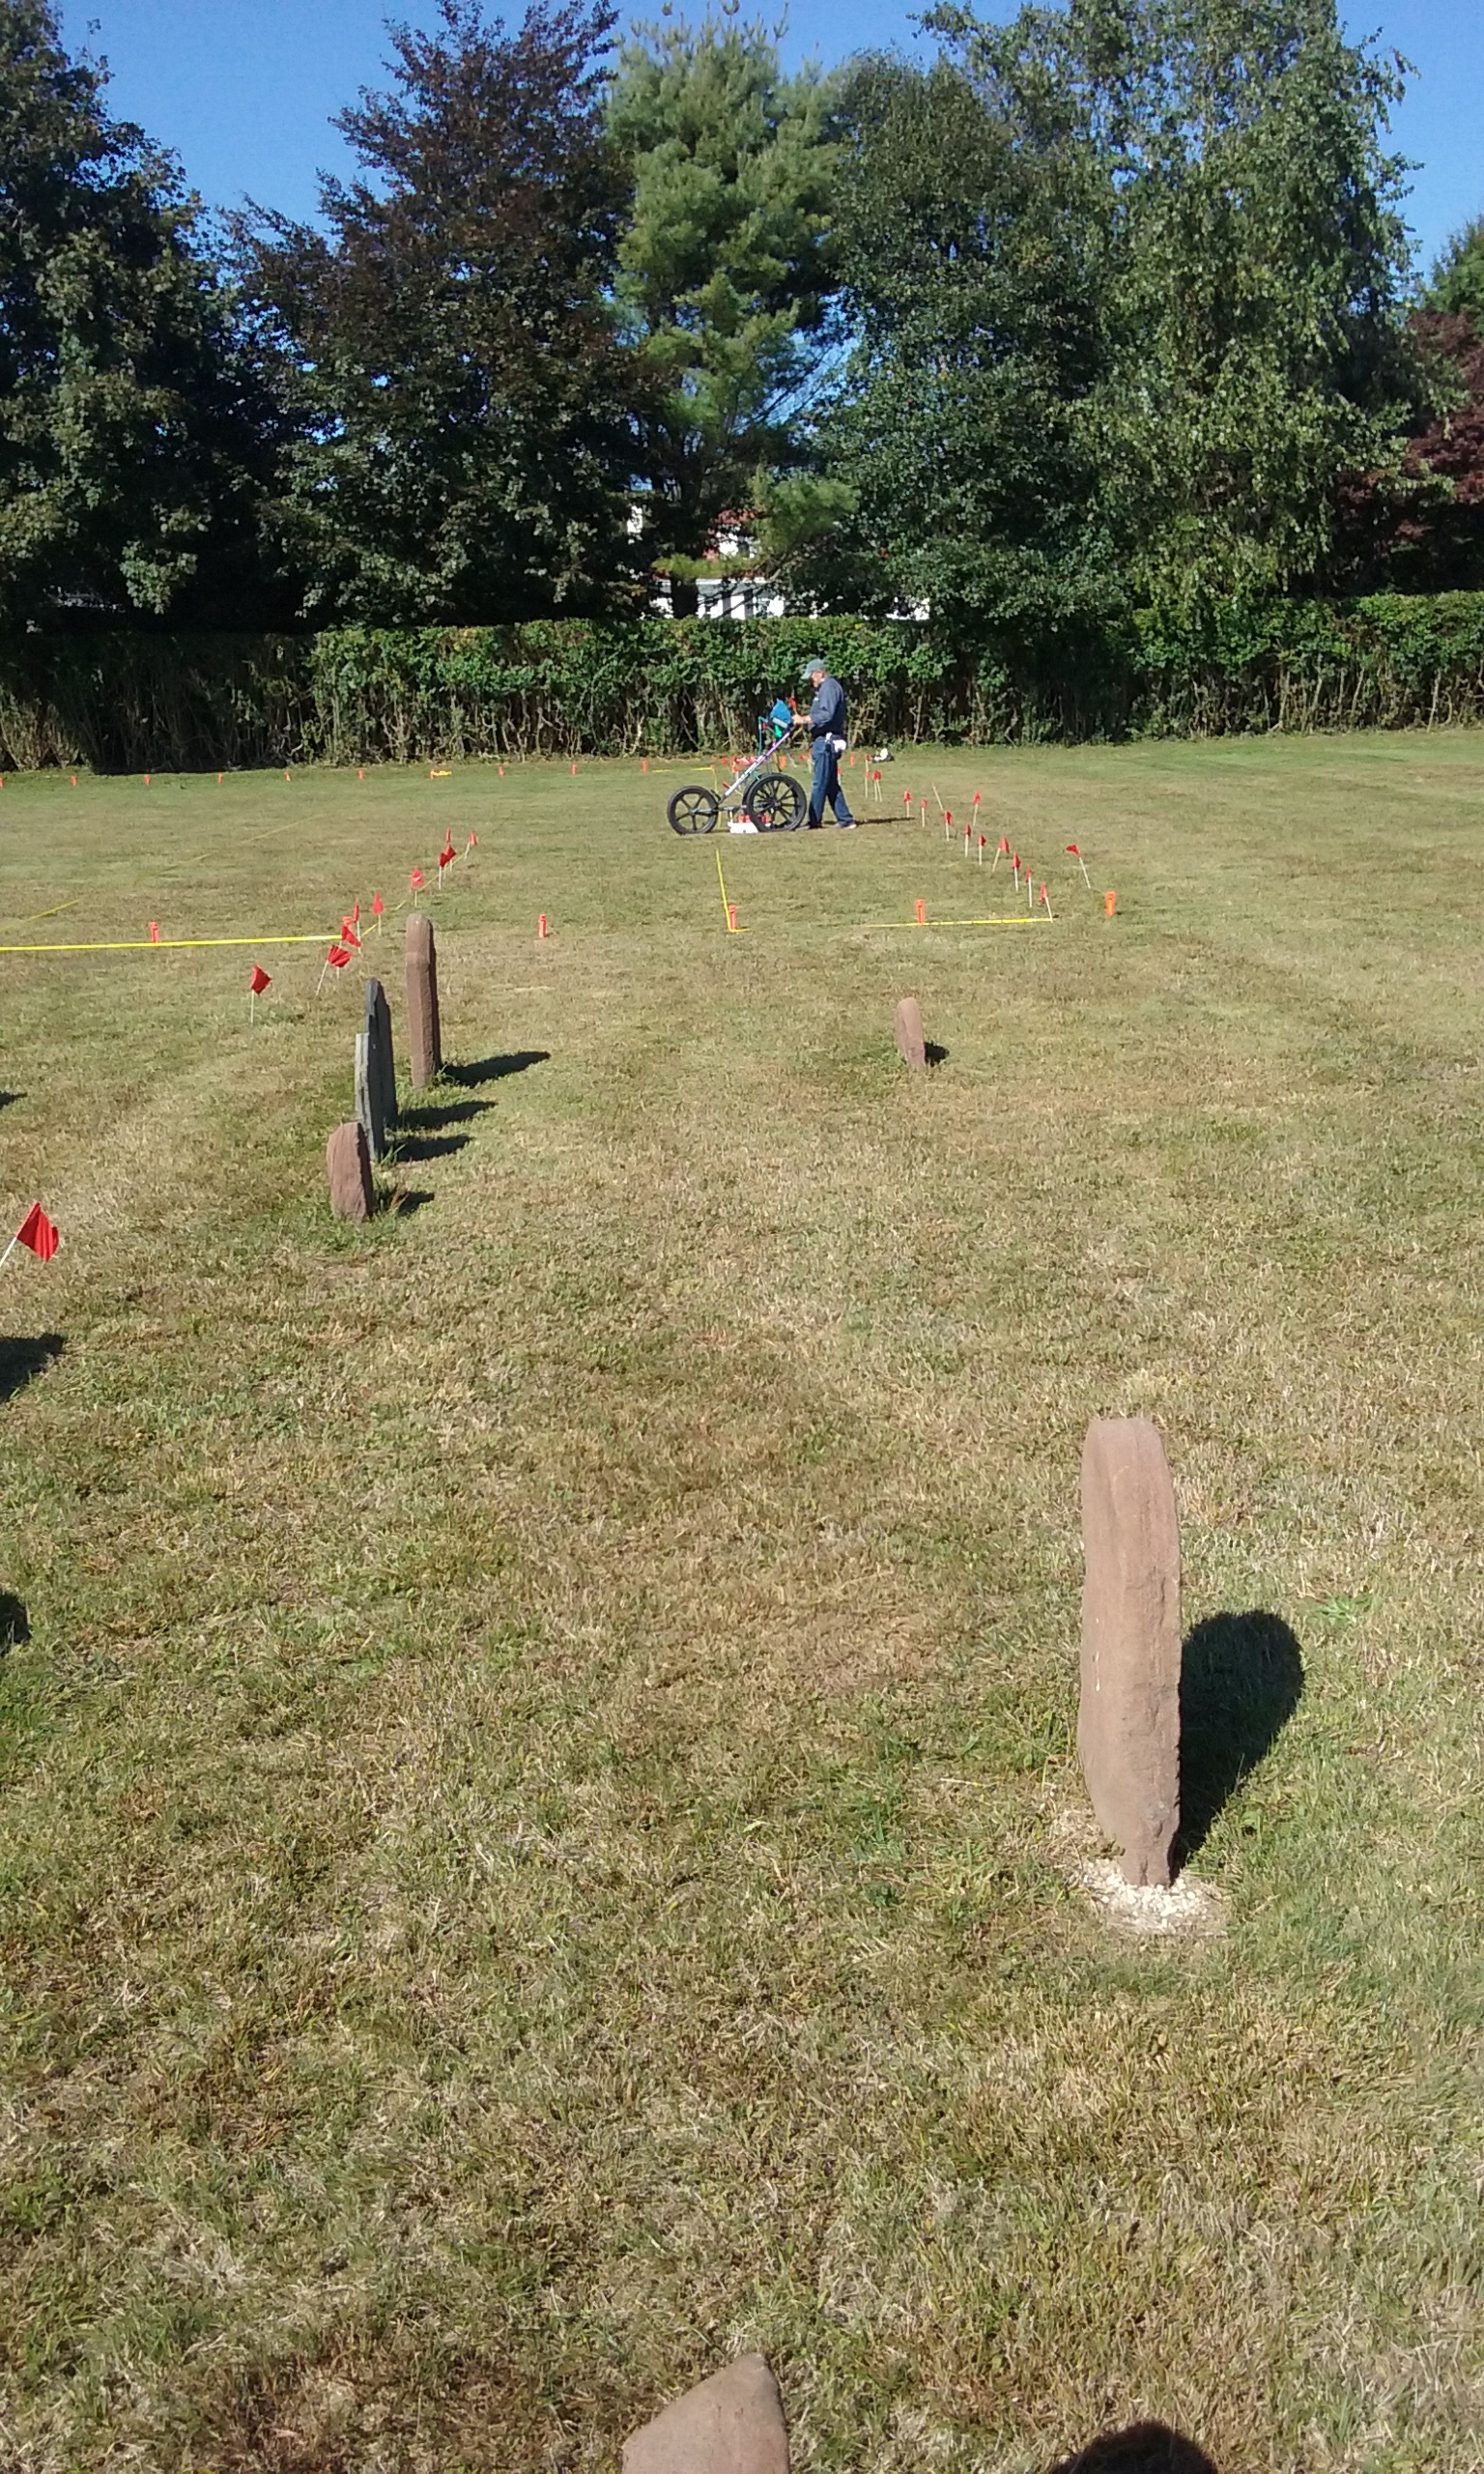 GPR with old gravestones